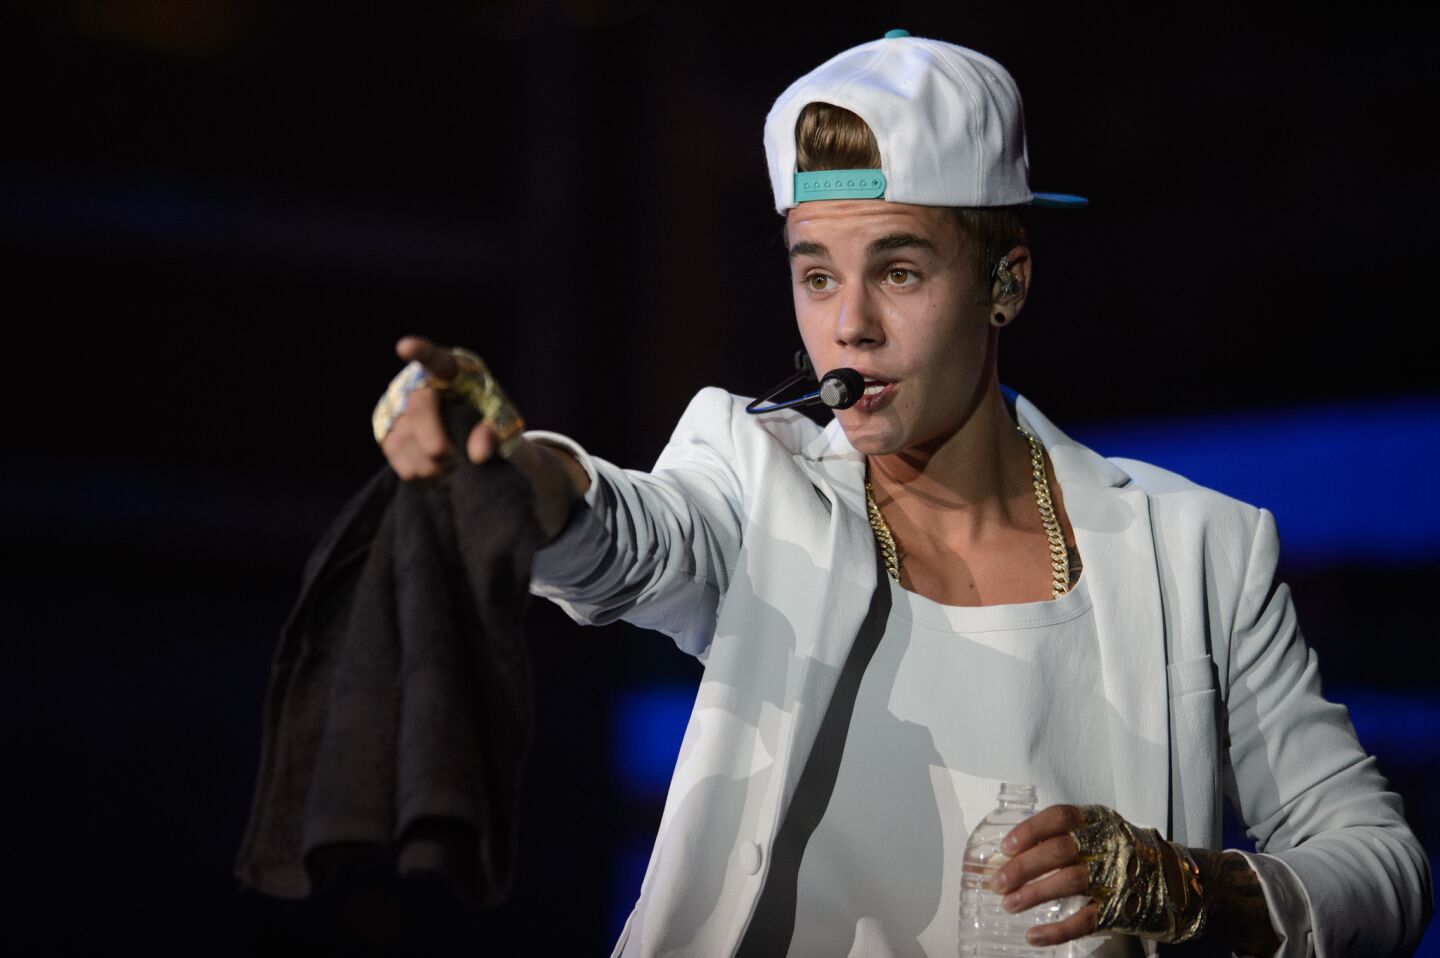 Justin Bieber released his first song since his DUI arrest in January. "I guess they want a reaction, but I ain't gonna give it to 'em," he boasts on "Broken," a club banger featured on a mixtape by his tour DJ. But the Biebs doesn't muster any believable defiance here in his delivery, despite the song's "I cannot be broken" mantra. Maybe he's just exhausted from hotboxing on private jets, frolicking with strippers and fighting his mounting legal battles -- we're certainly tired of reading about them.